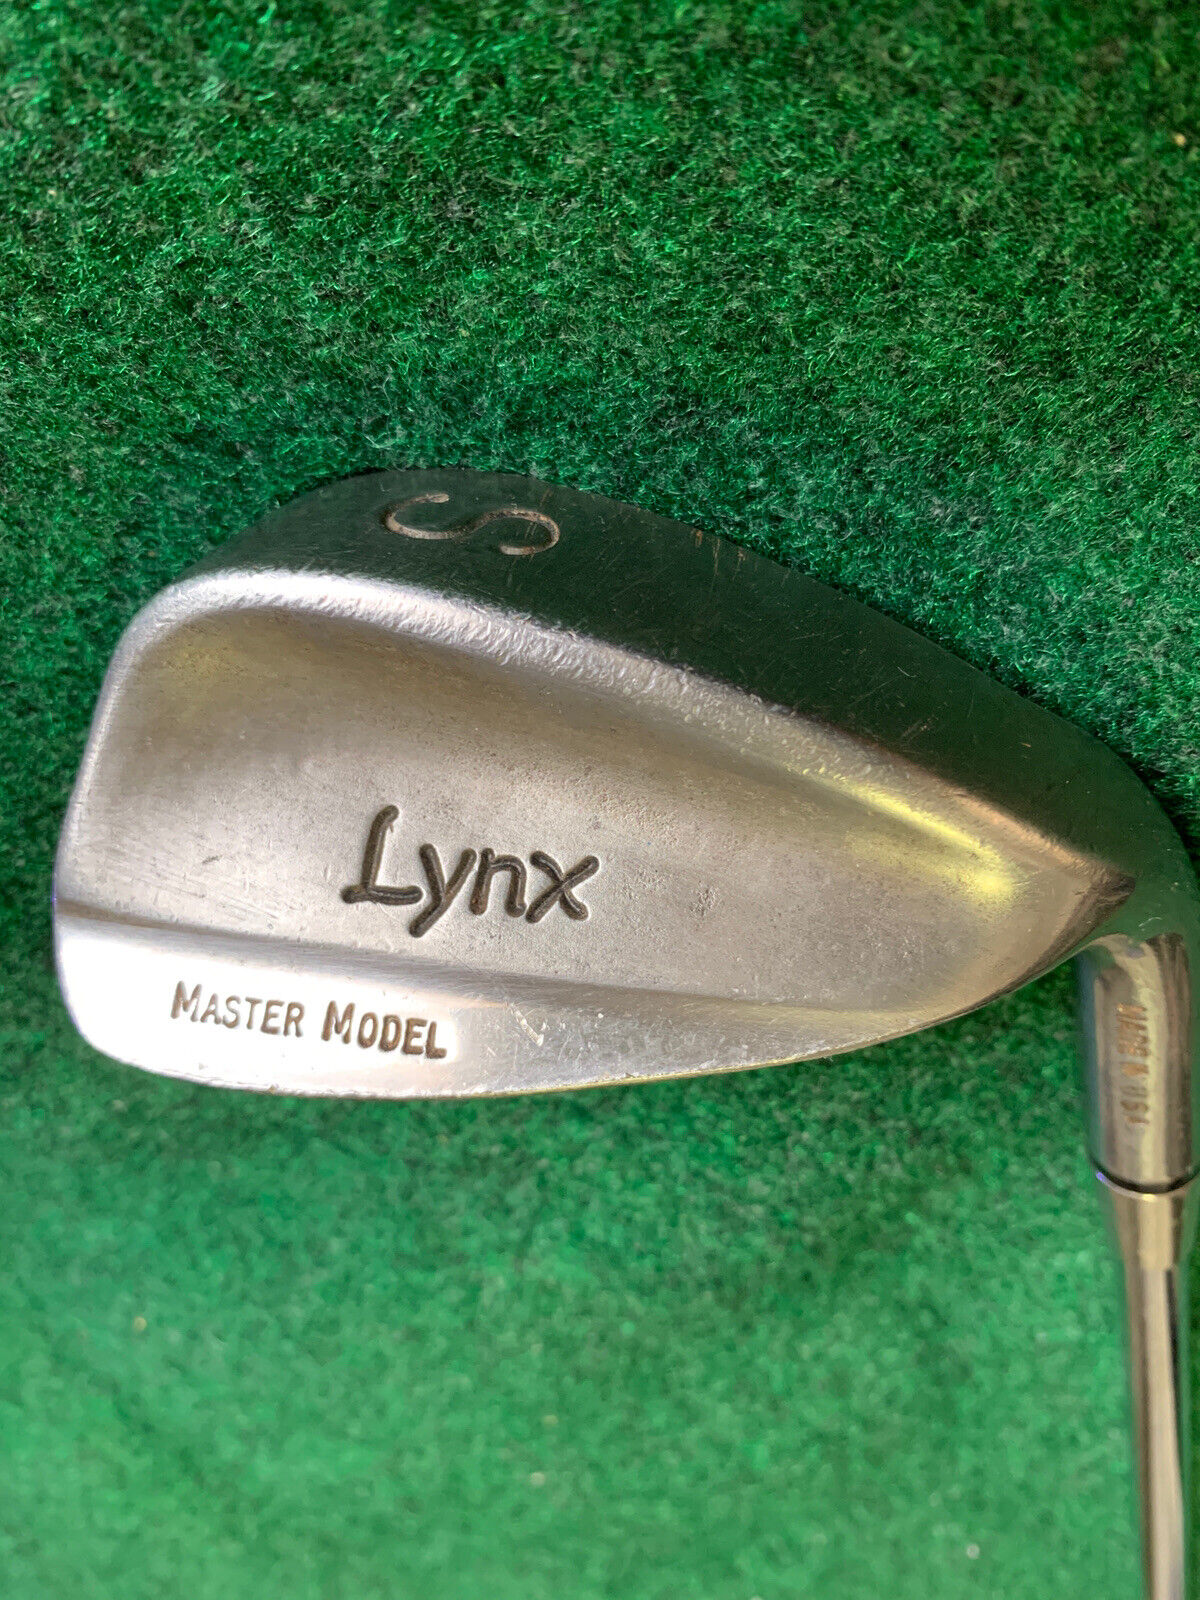 Lynx Master Model Sand Wedge Right Handed Usa